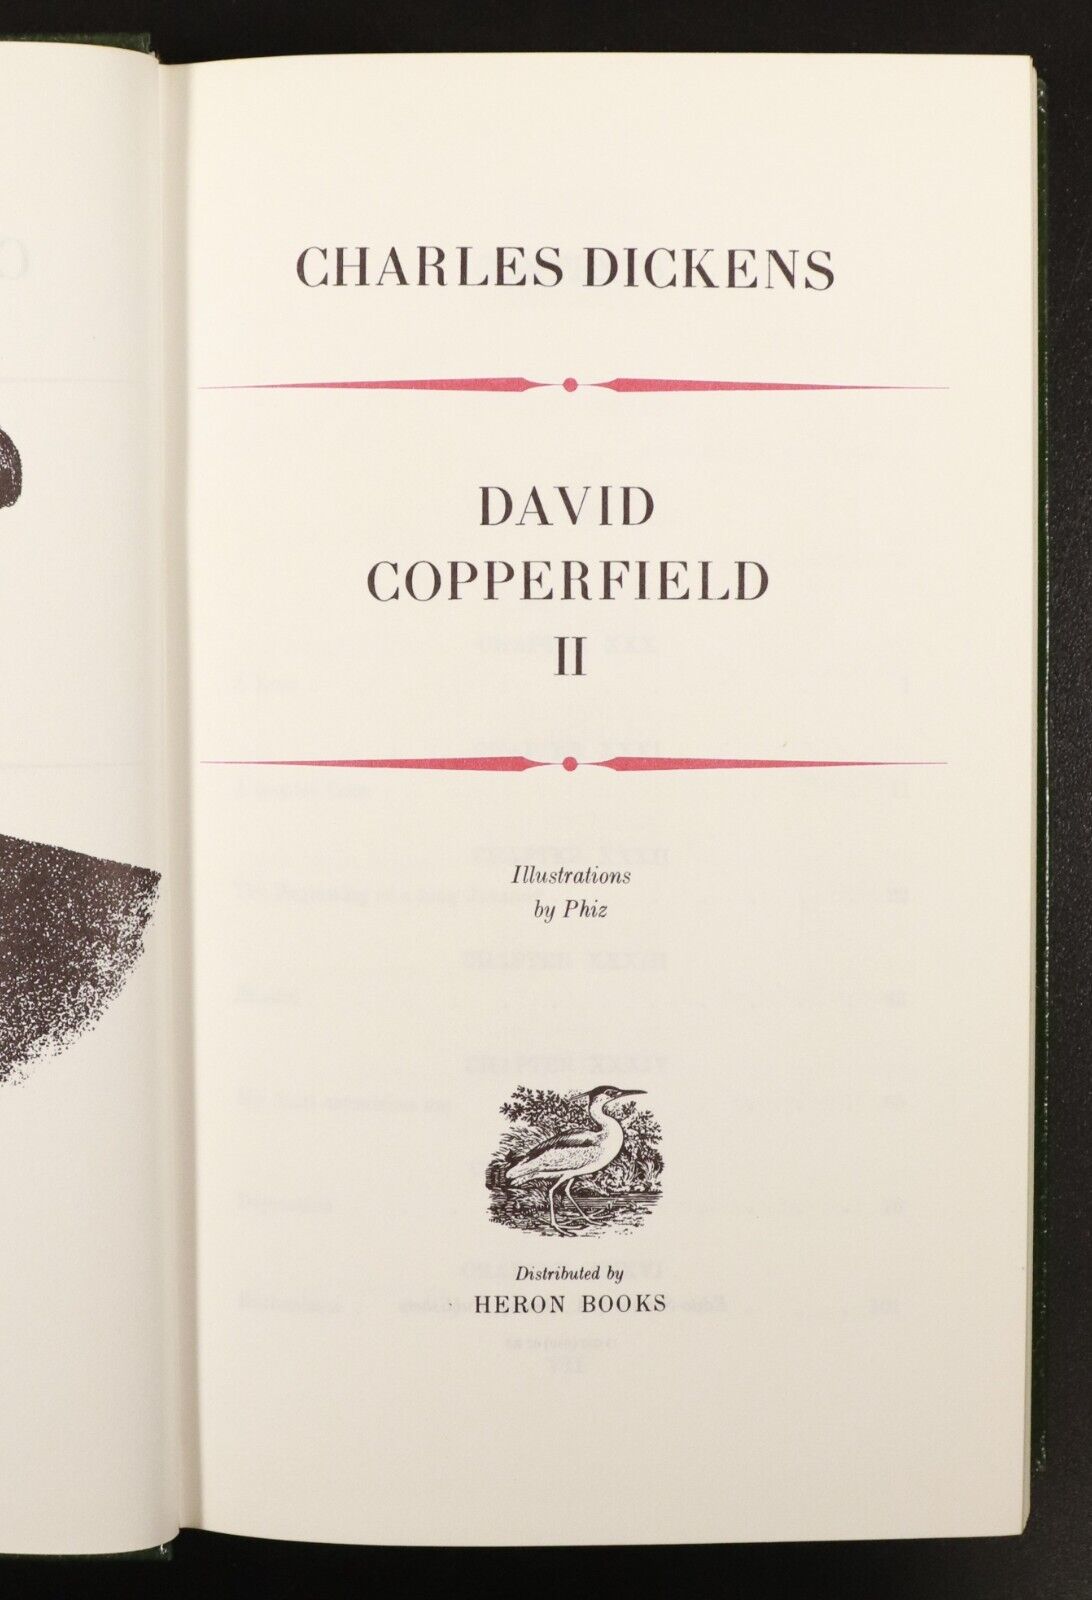 1970 3vol Copperfield & Oliver Twist by Charles Dickens Vintage Fiction Books